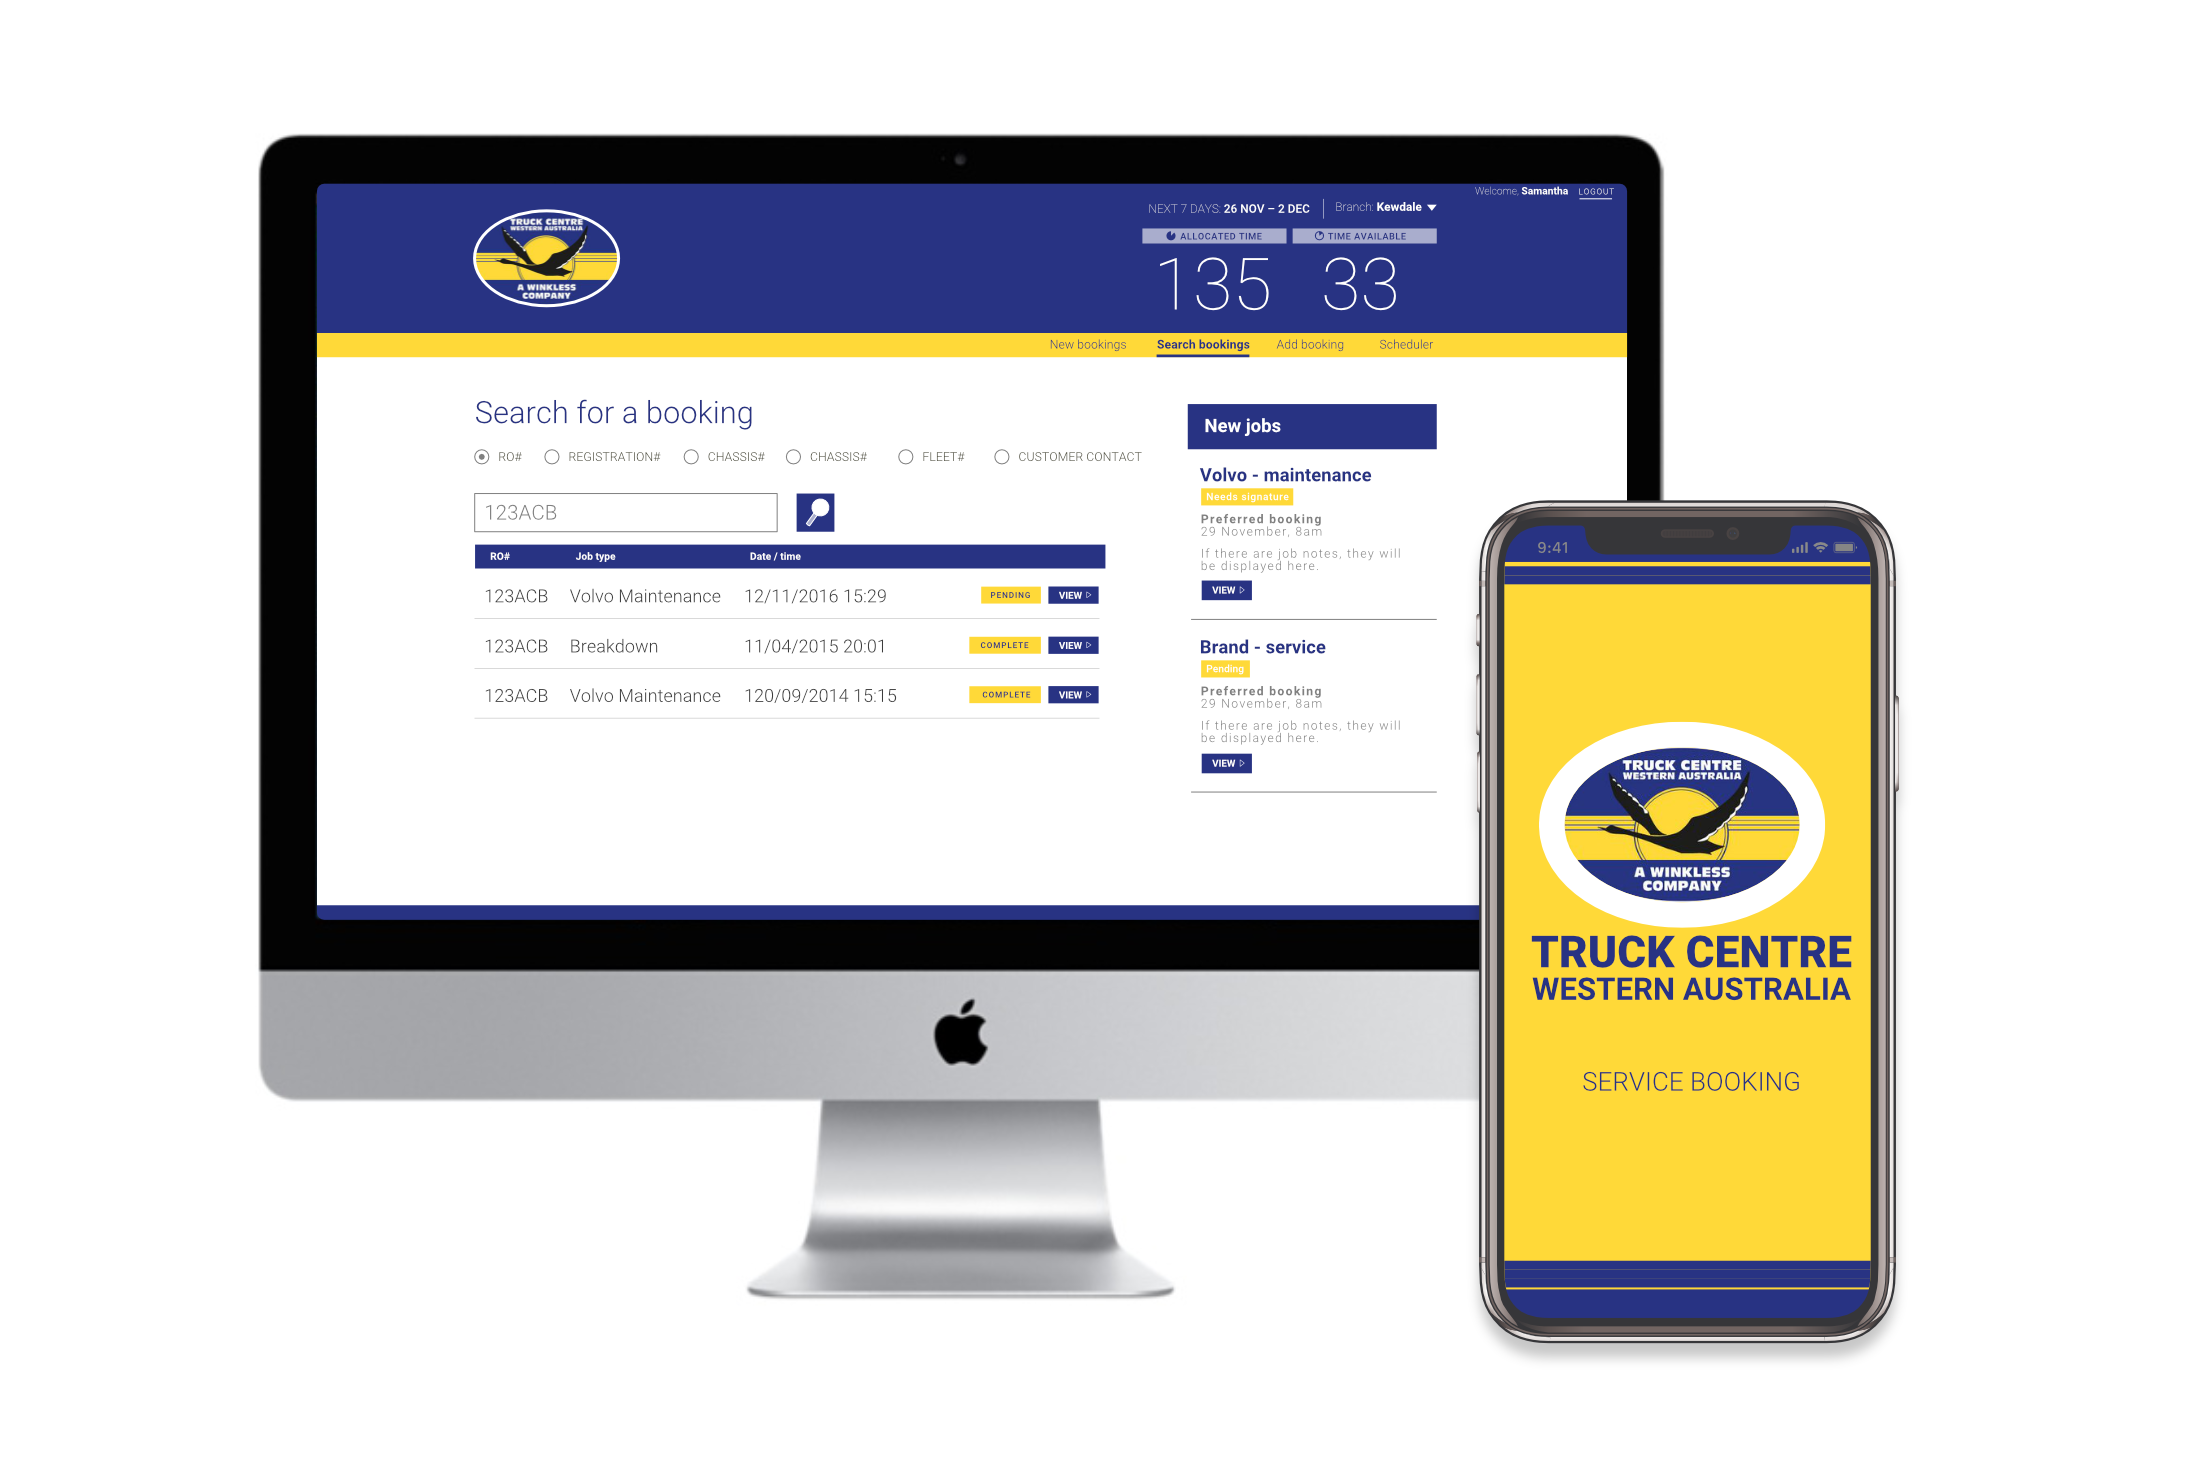 Truck Centre scheduling app (desktop), and booking app (mobile), design by Charlotte Clark for WATC